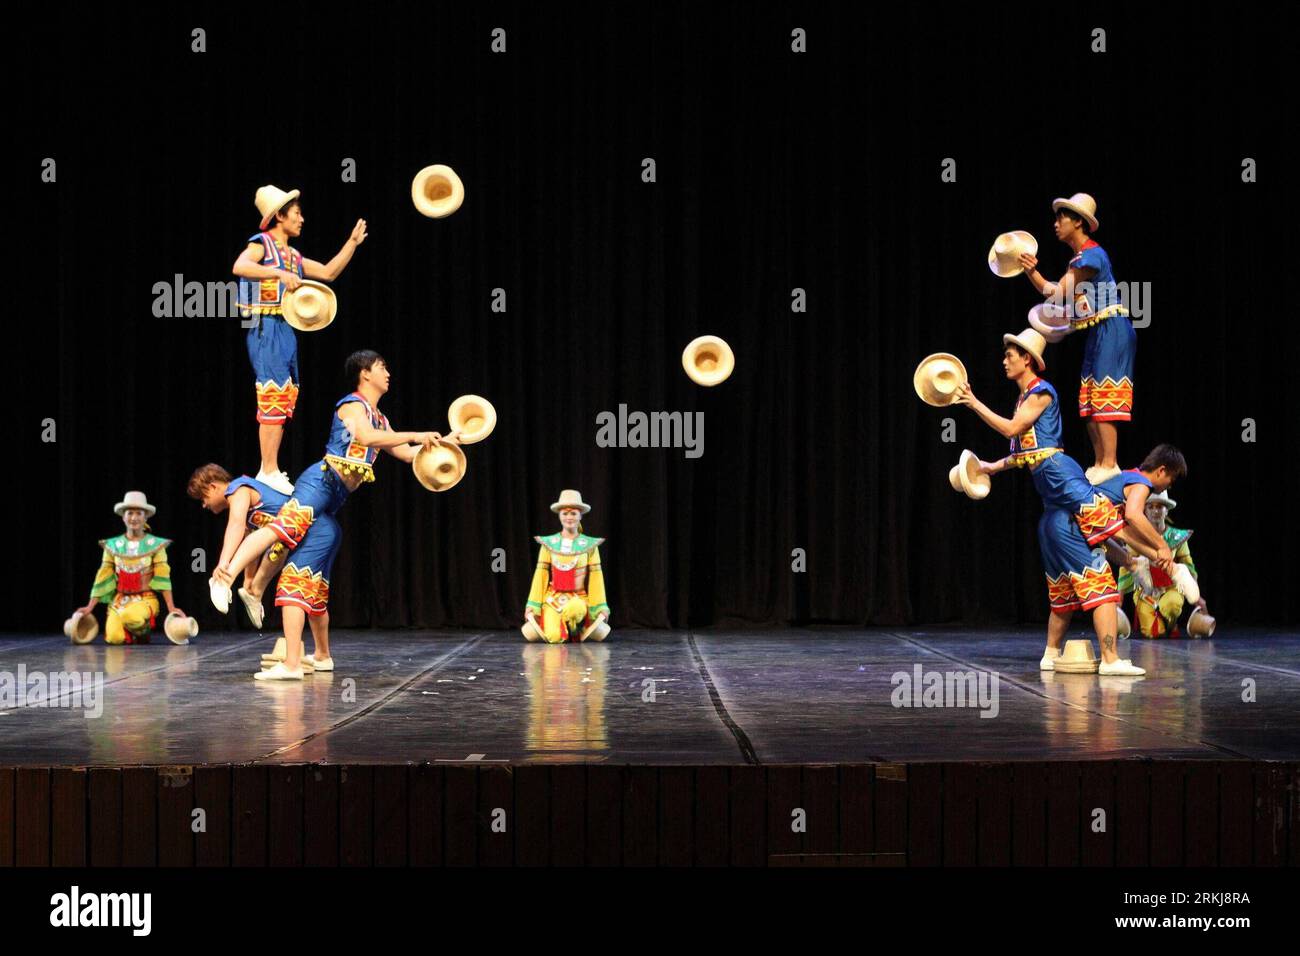 Bildnummer: 56048893  Datum: 20.09.2011  Copyright: imago/Xinhua (110920) -- NEW DELHI, Sept. 20, 2011 (Xinhua) -- Actors from China s Yunnan Acrobatics Troupe perform at the Siri Fort Auditorium in New Delhi, India, Sept. 20, 2011. The show, organized by the Chinese Embassy and Indian Council for Cultural Relations, was part of the China-India Cultural Exchange Program. (Xinhua/Li Yigang) (wjd) INDIA-YUNNAN ACROBATICS TROUPE-PERFORMANCE PUBLICATIONxNOTxINxCHN Kultur Entertainment Akrobatik xjh x0x 2011 quer Highlight      56048893 Date 20 09 2011 Copyright Imago XINHUA  New Delhi Sept 20 2011 Stock Photo